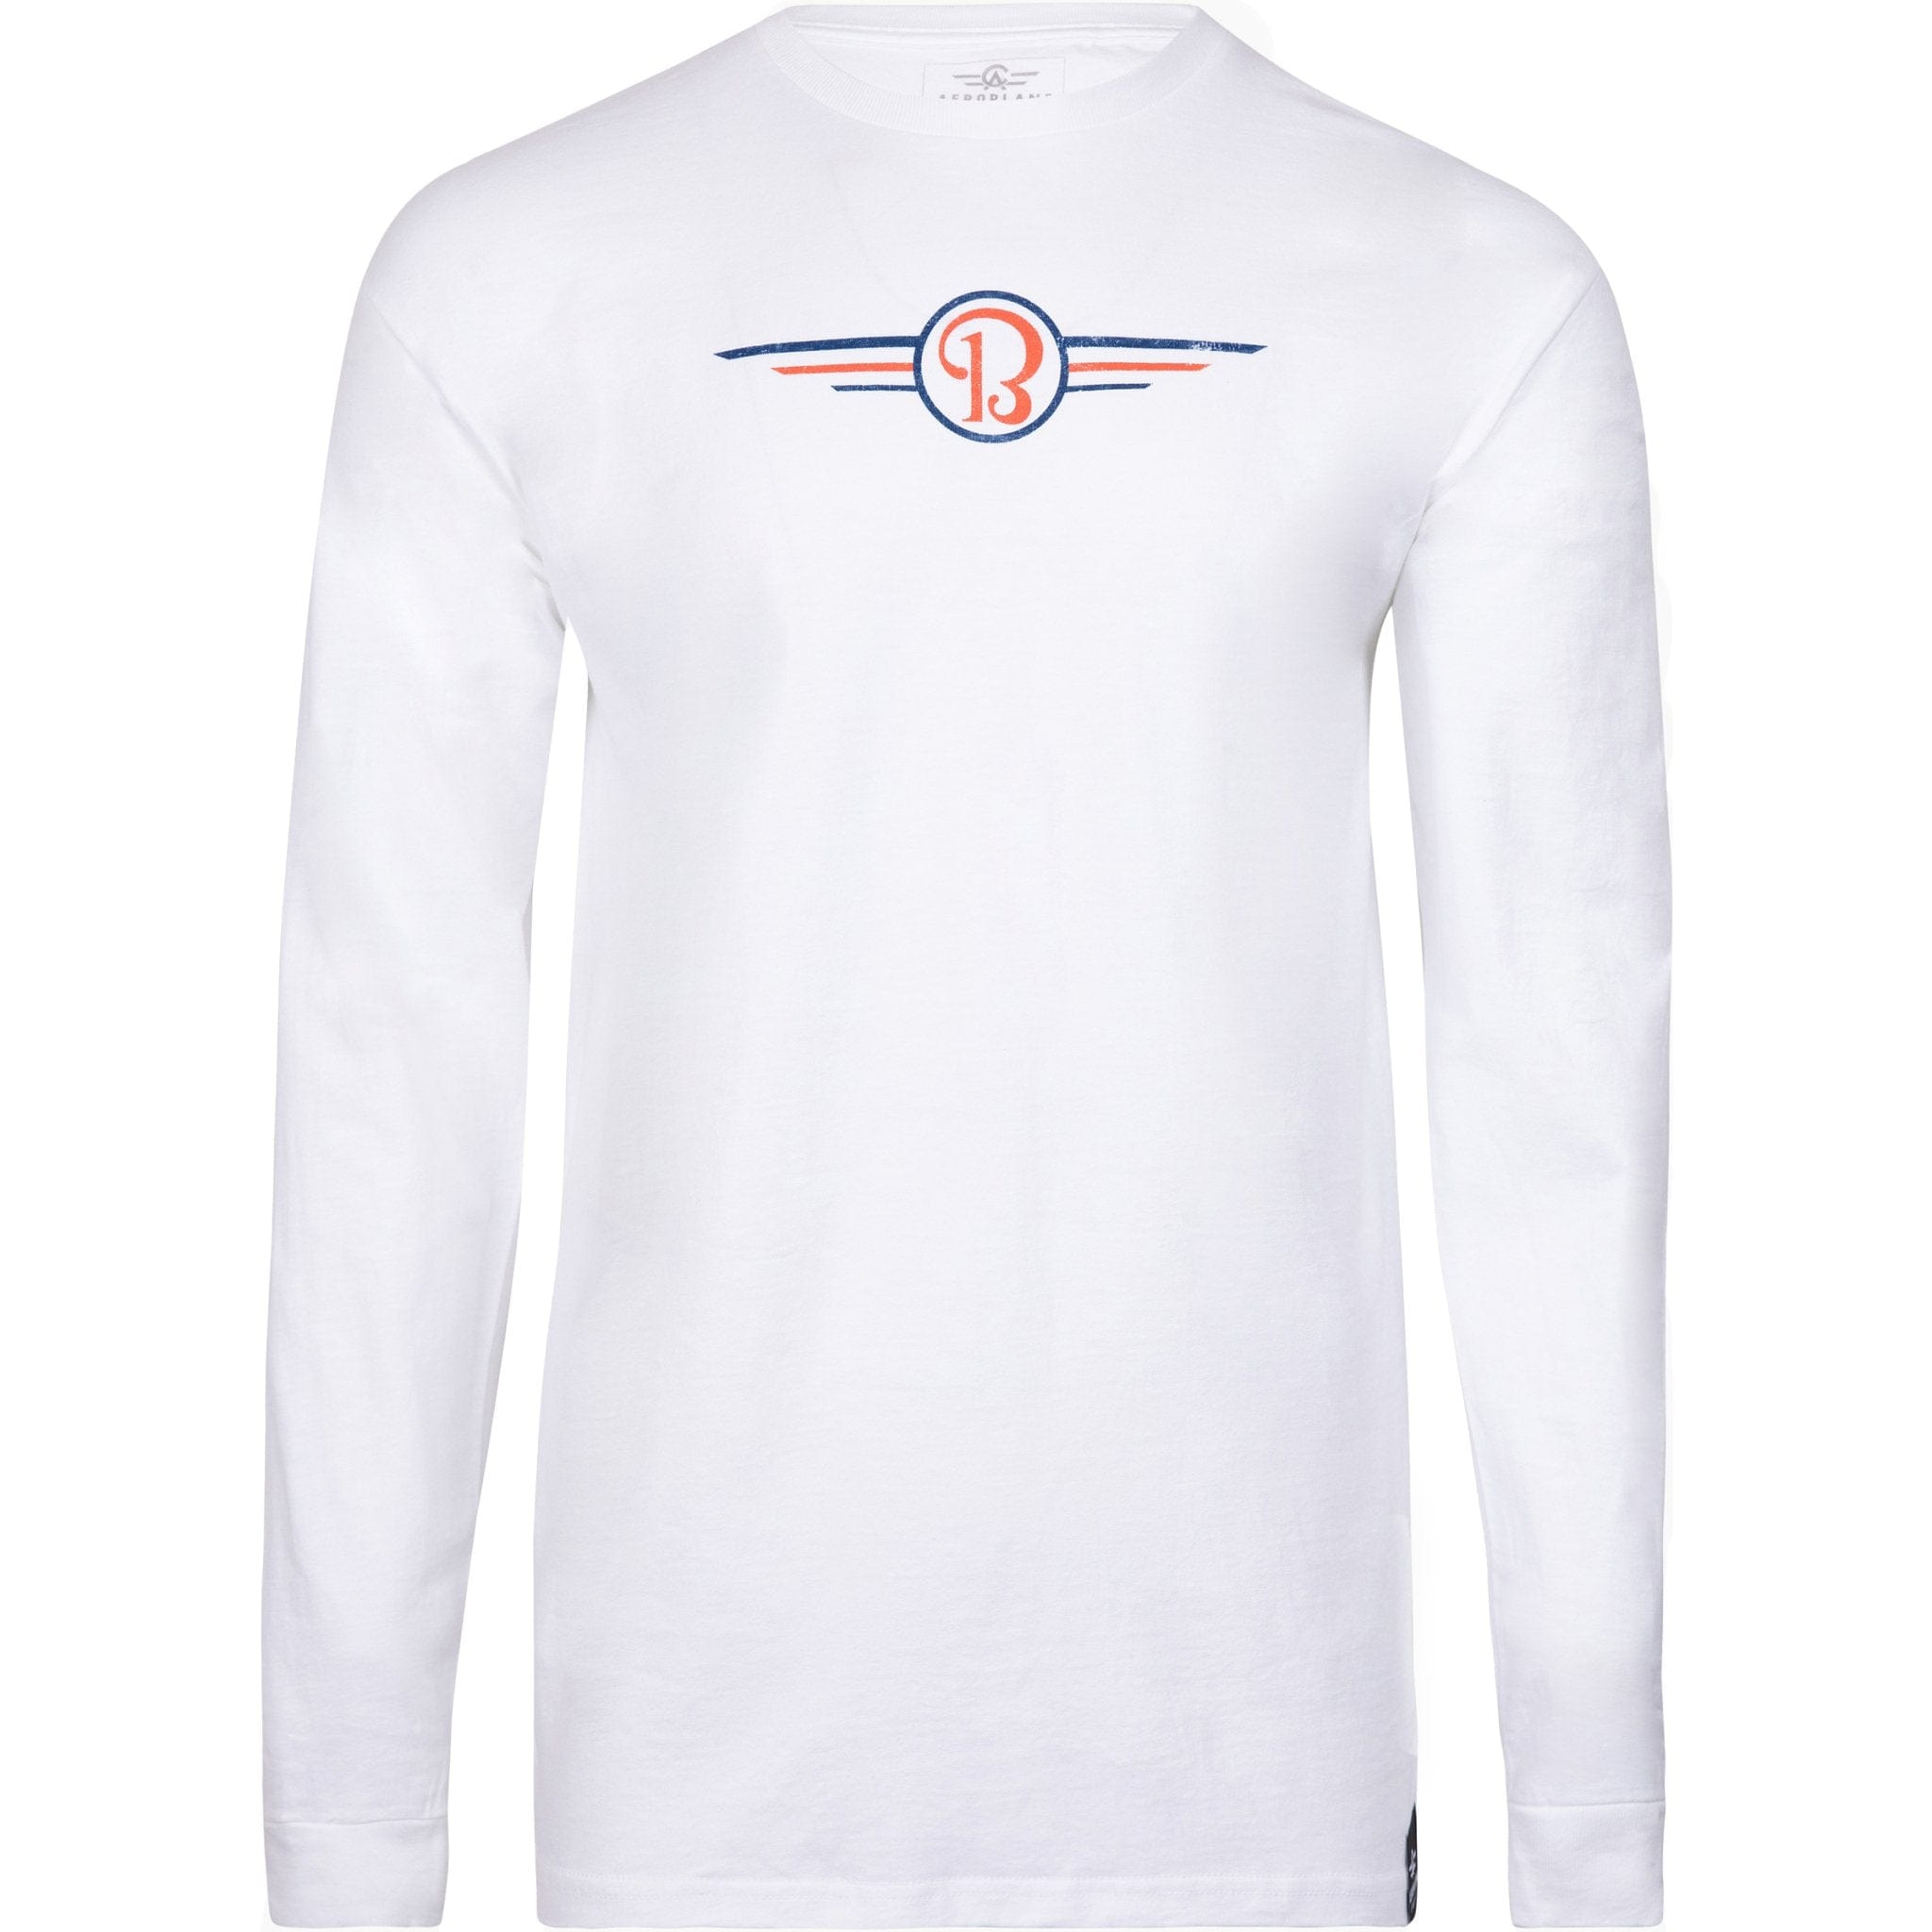 Beechcraft Staggerwing Officially Licensed Long Sleeve T-Shirt - PilotMall.com